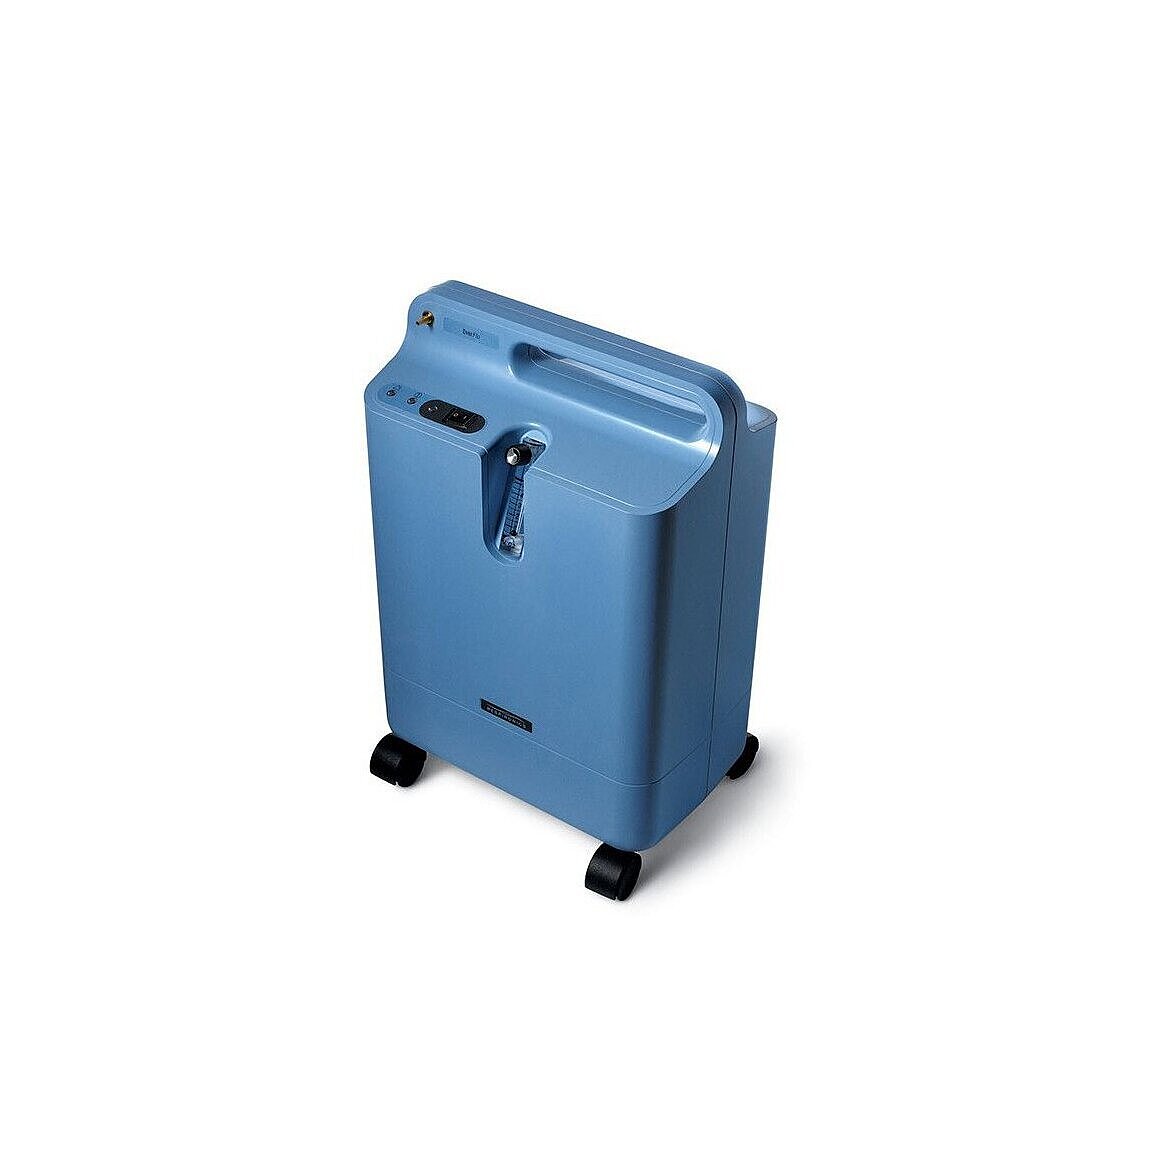 everflo oxygen concentrator device right